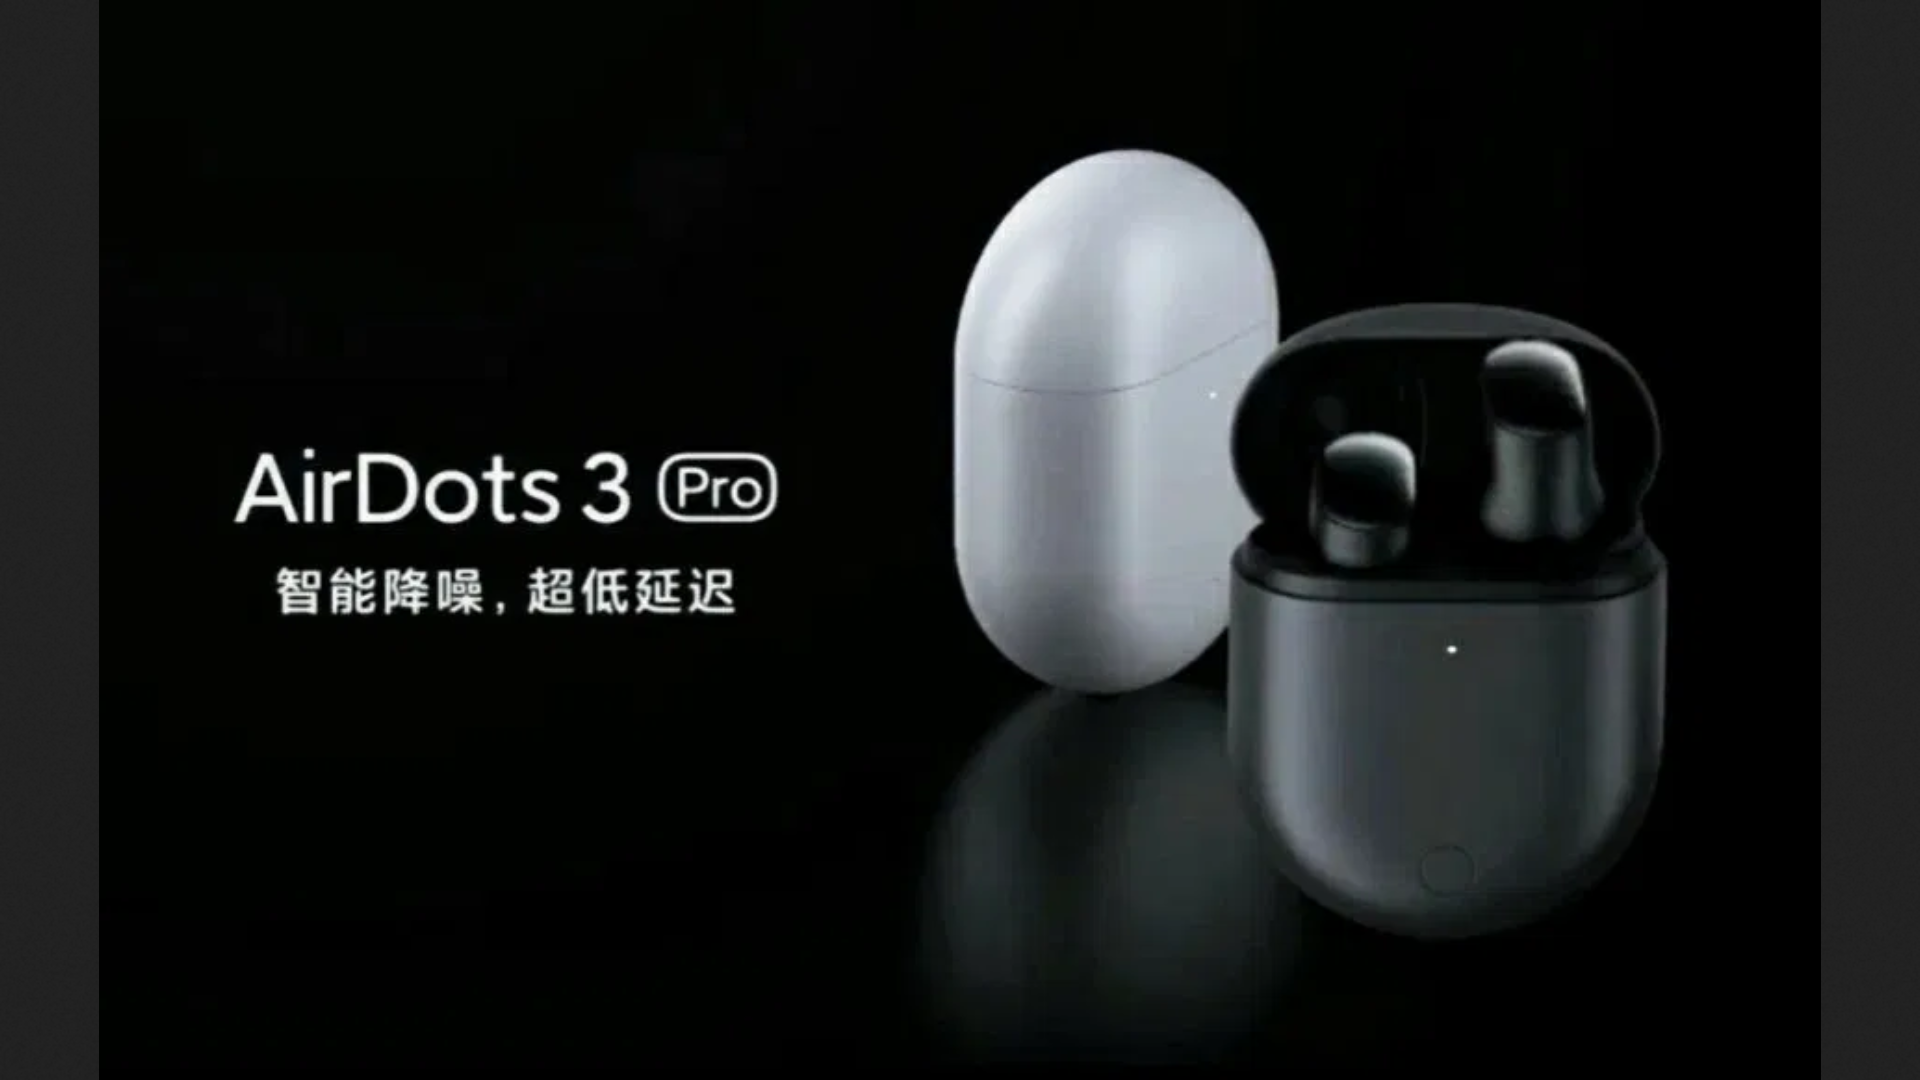 Redmi launches the AirDots 3 Pro as its latest noise-cancelling TWS earbuds  - NotebookCheck.net News